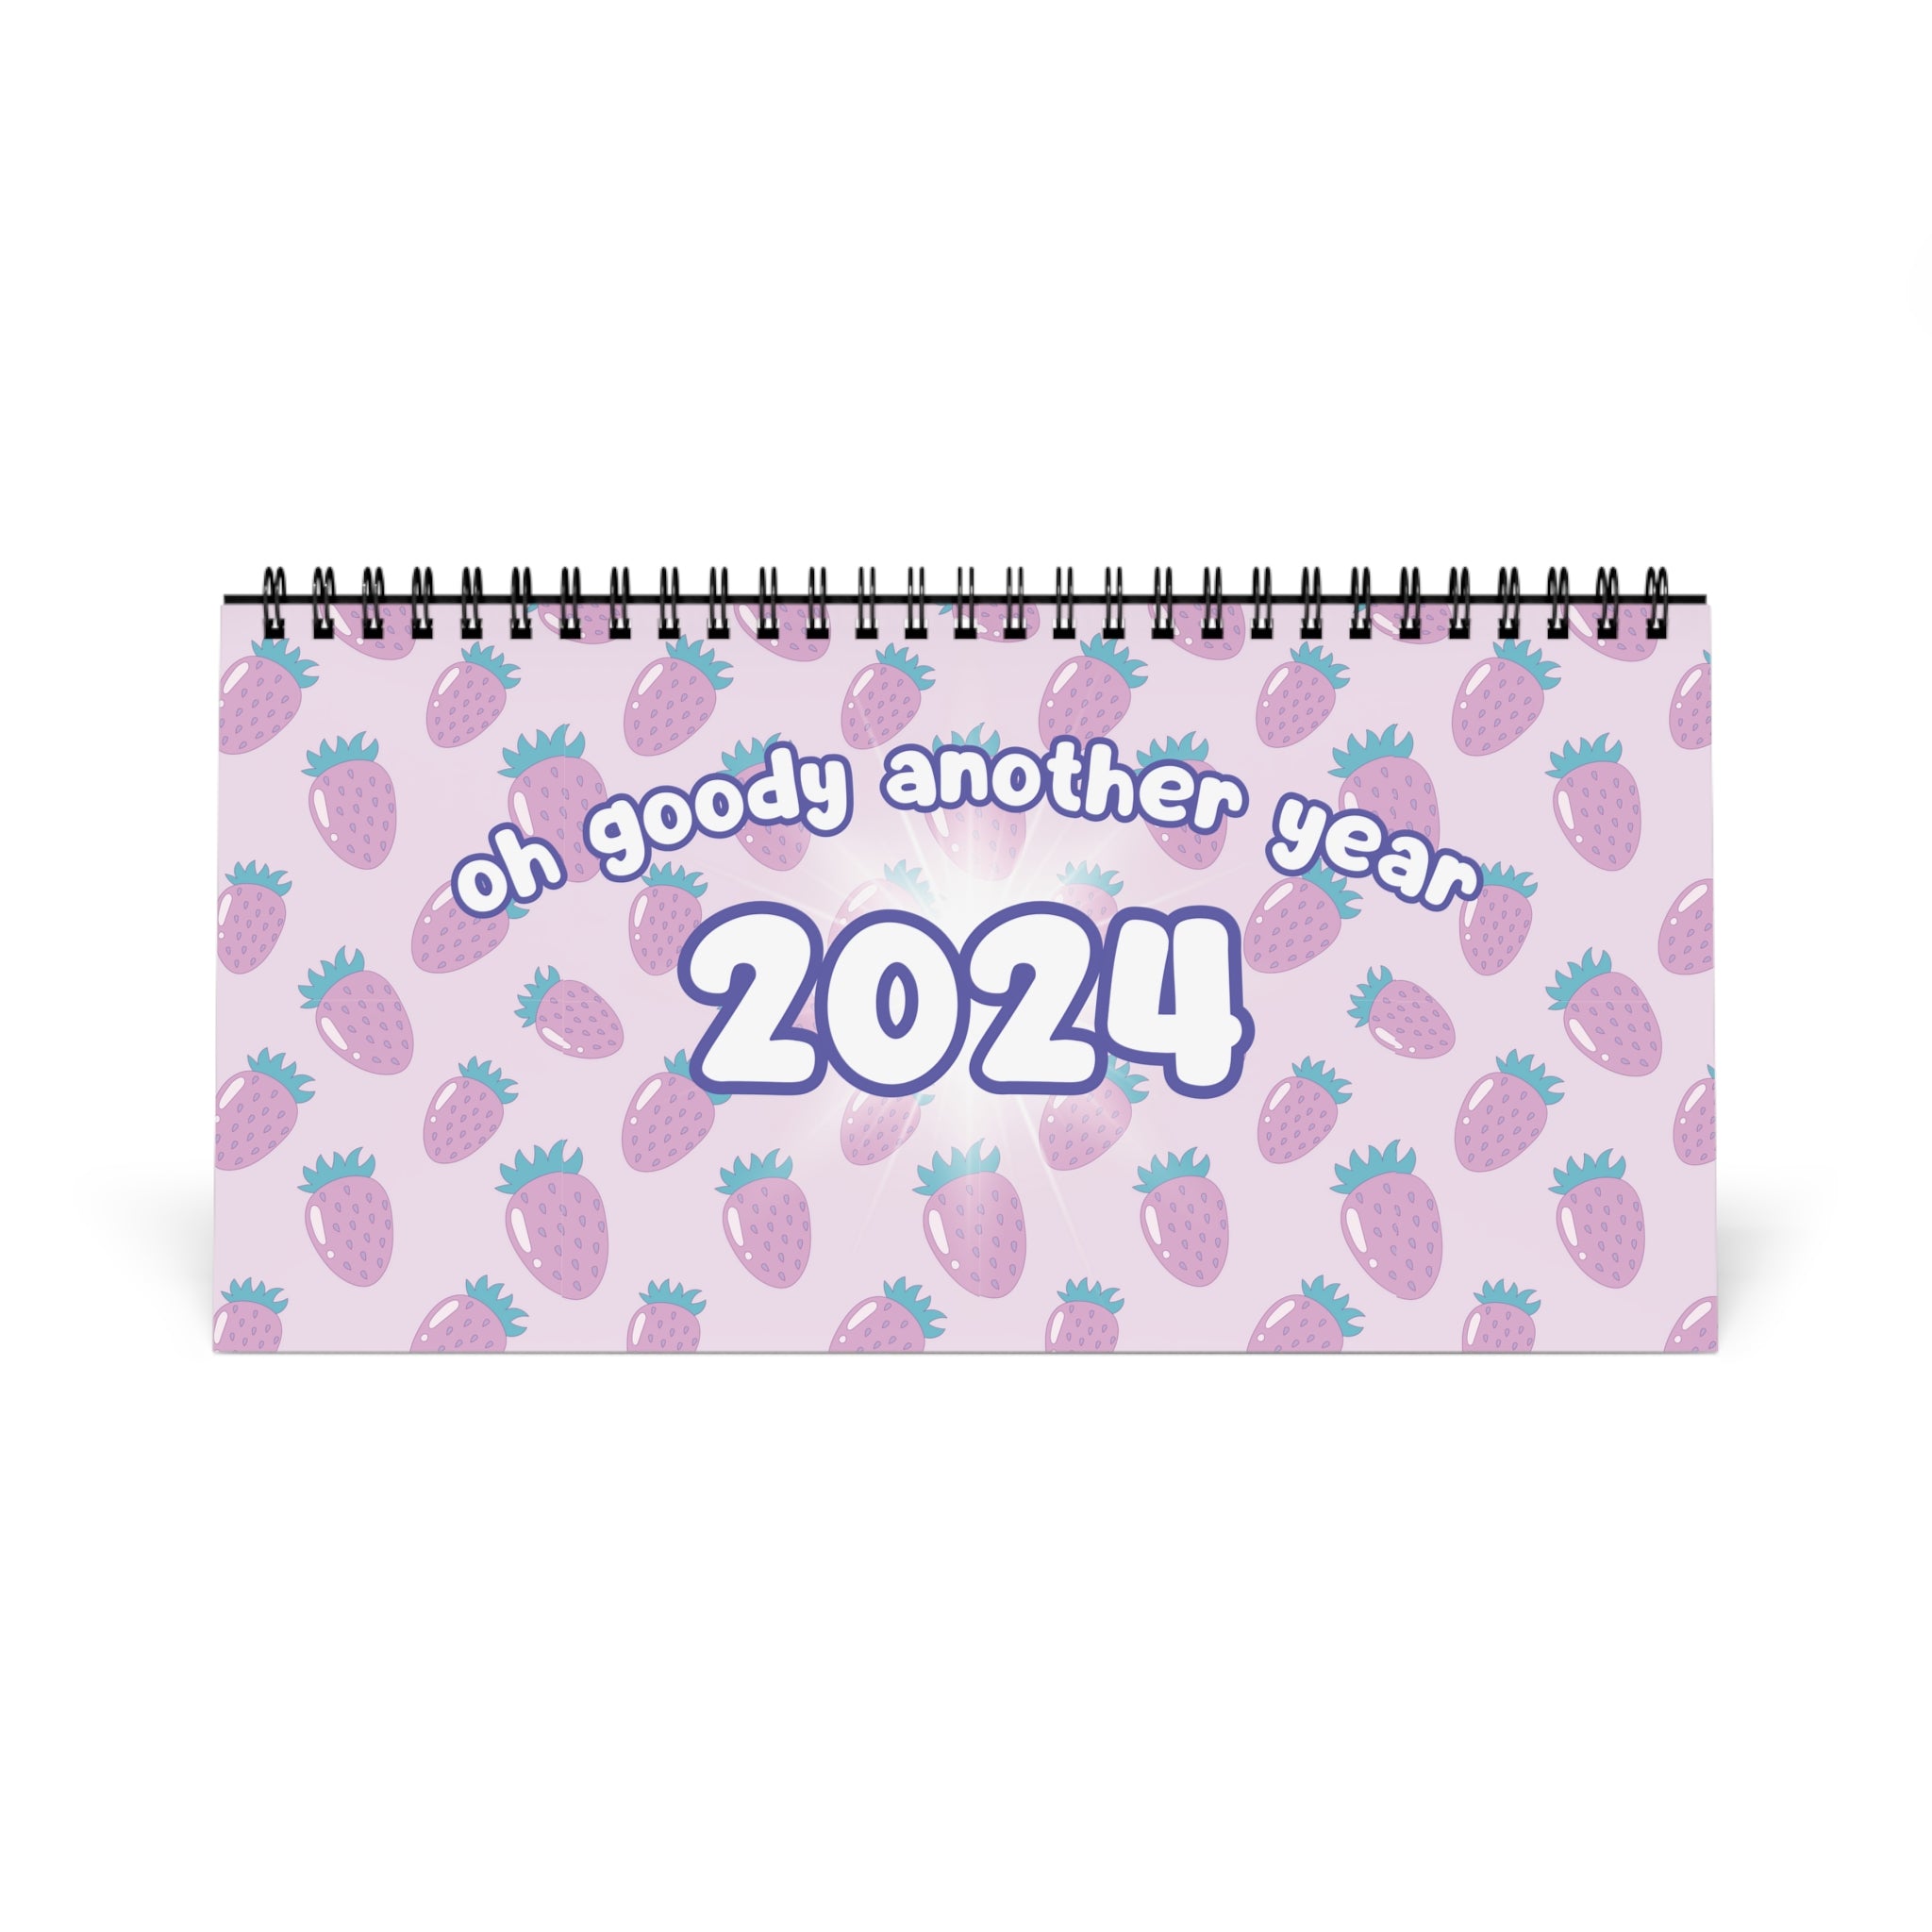 2024 Oh Goody Another Year Sarcastic Desk Calendar Corporate Snark